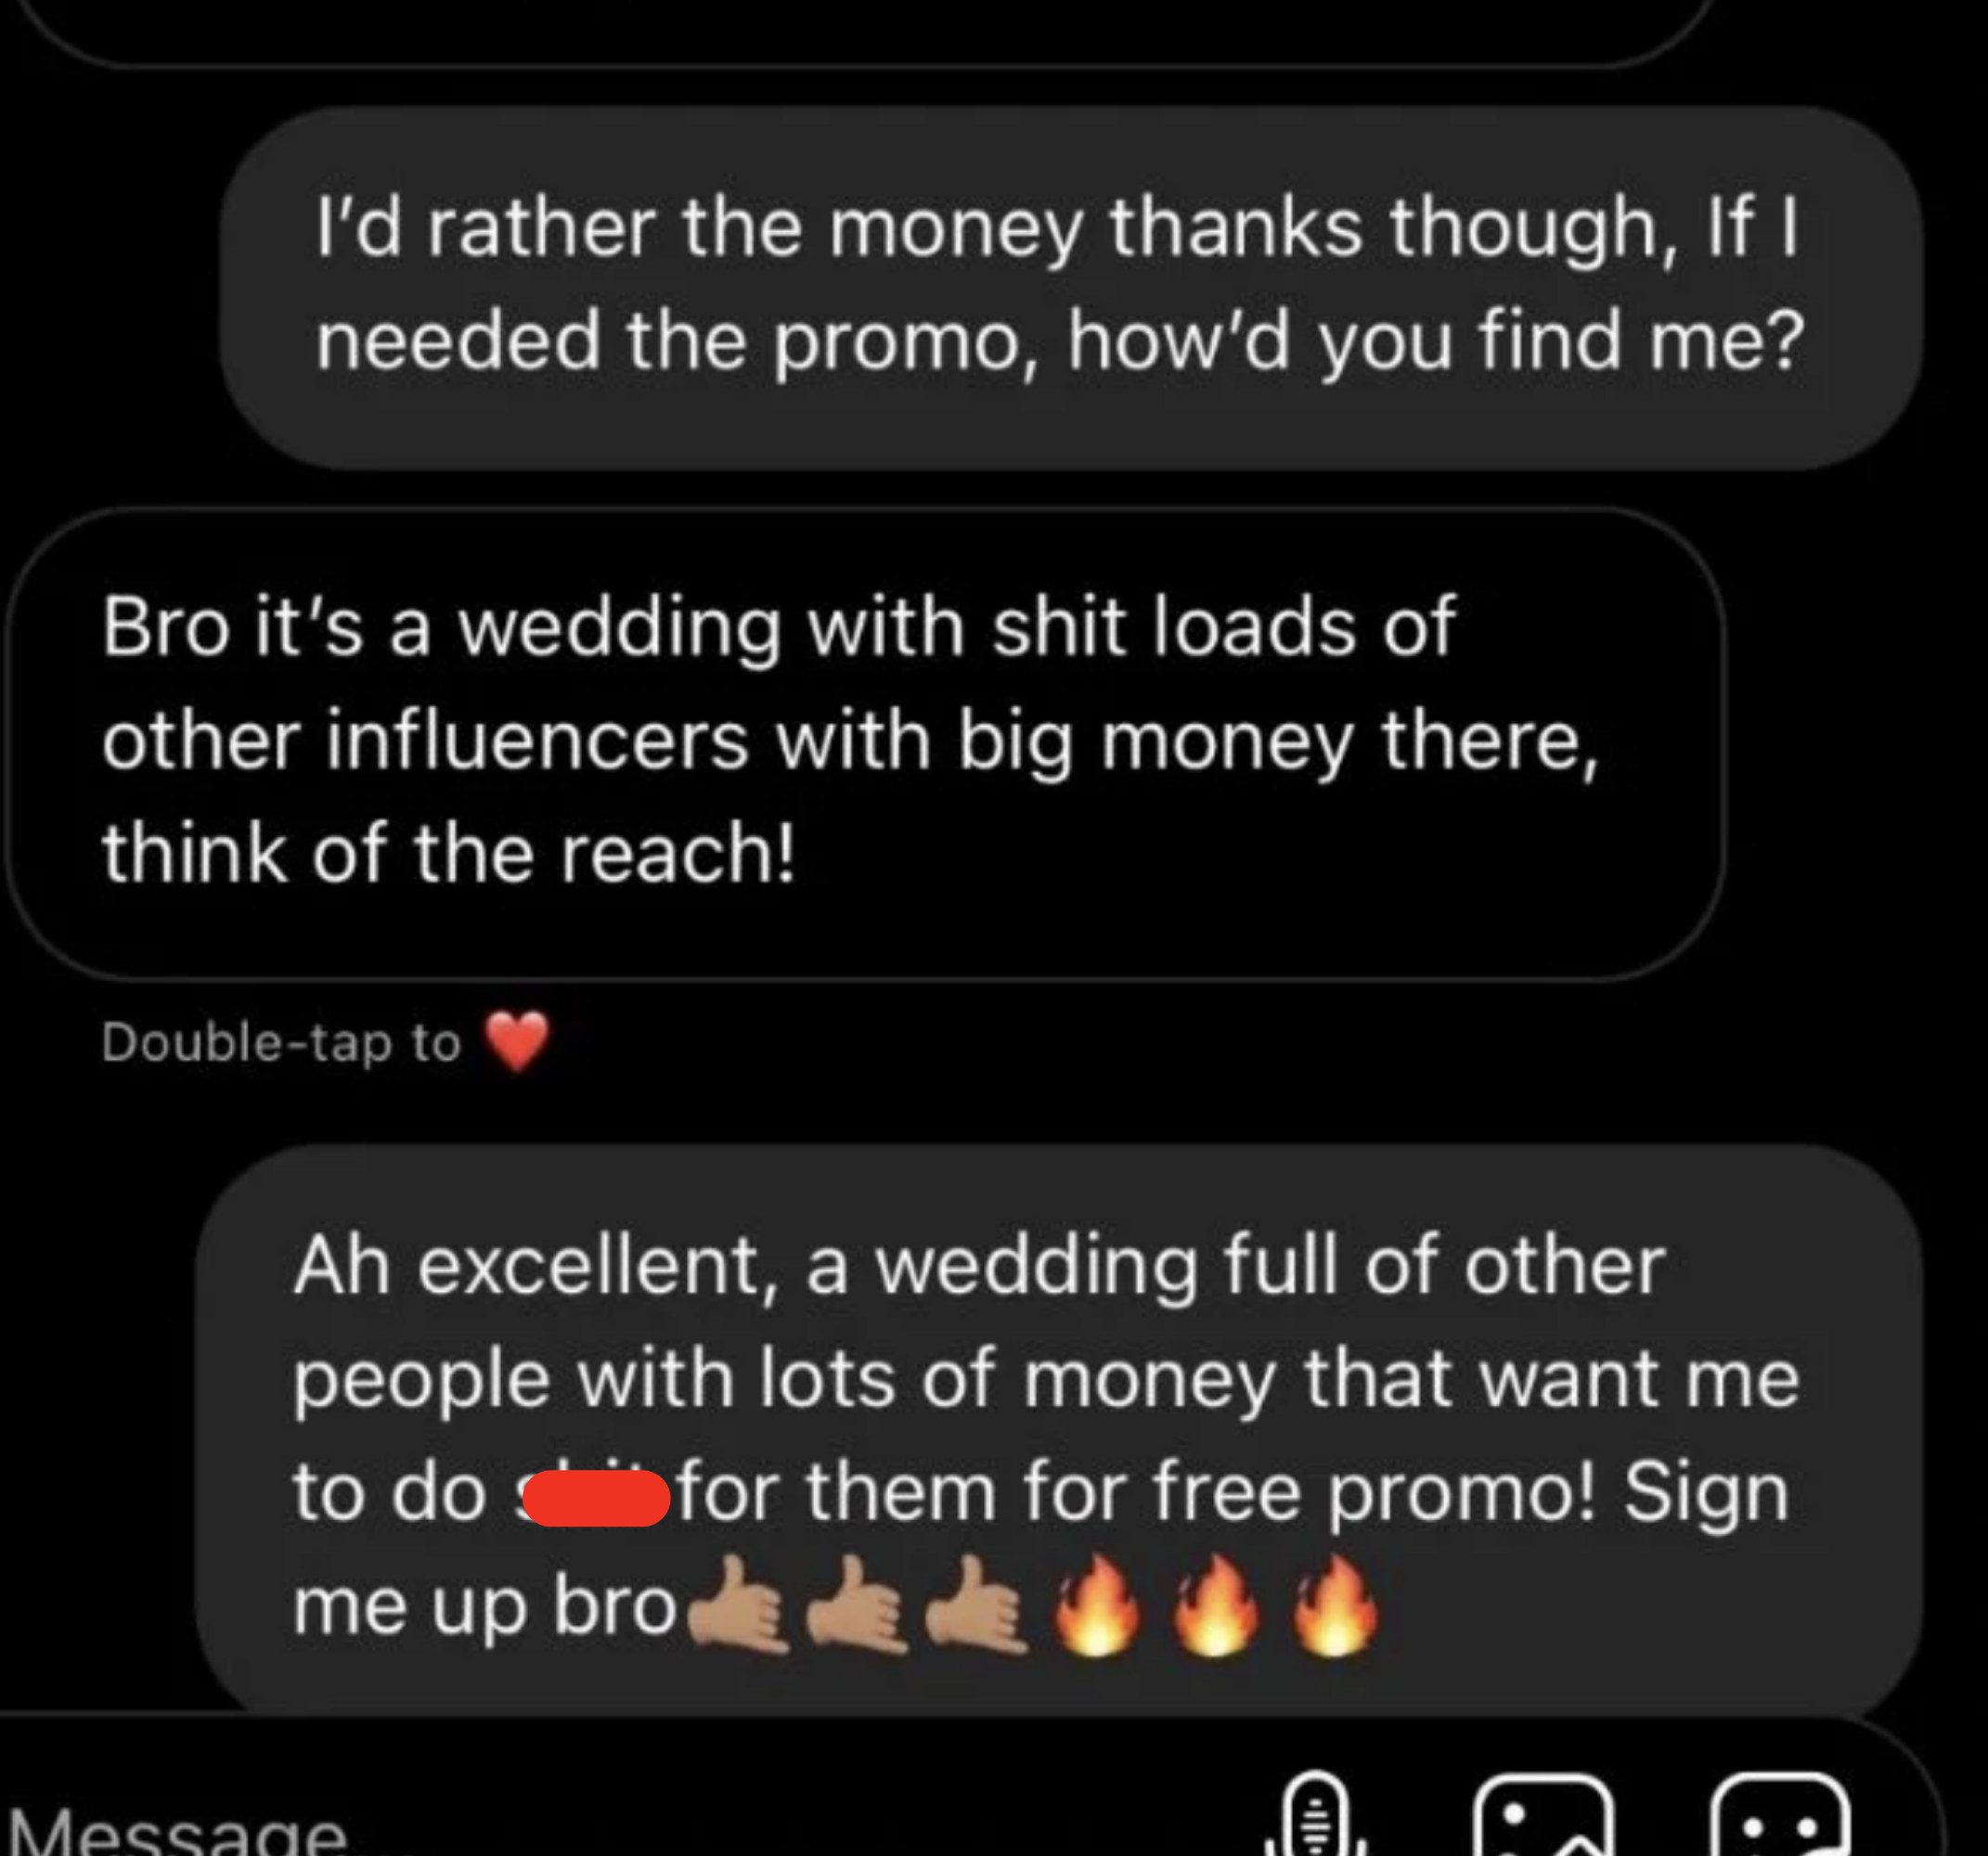 The musician says they&#x27;d rather have the money, the influencer says the wedding will be full of other influencers, and the musician says great, more people who won&#x27;t pay me